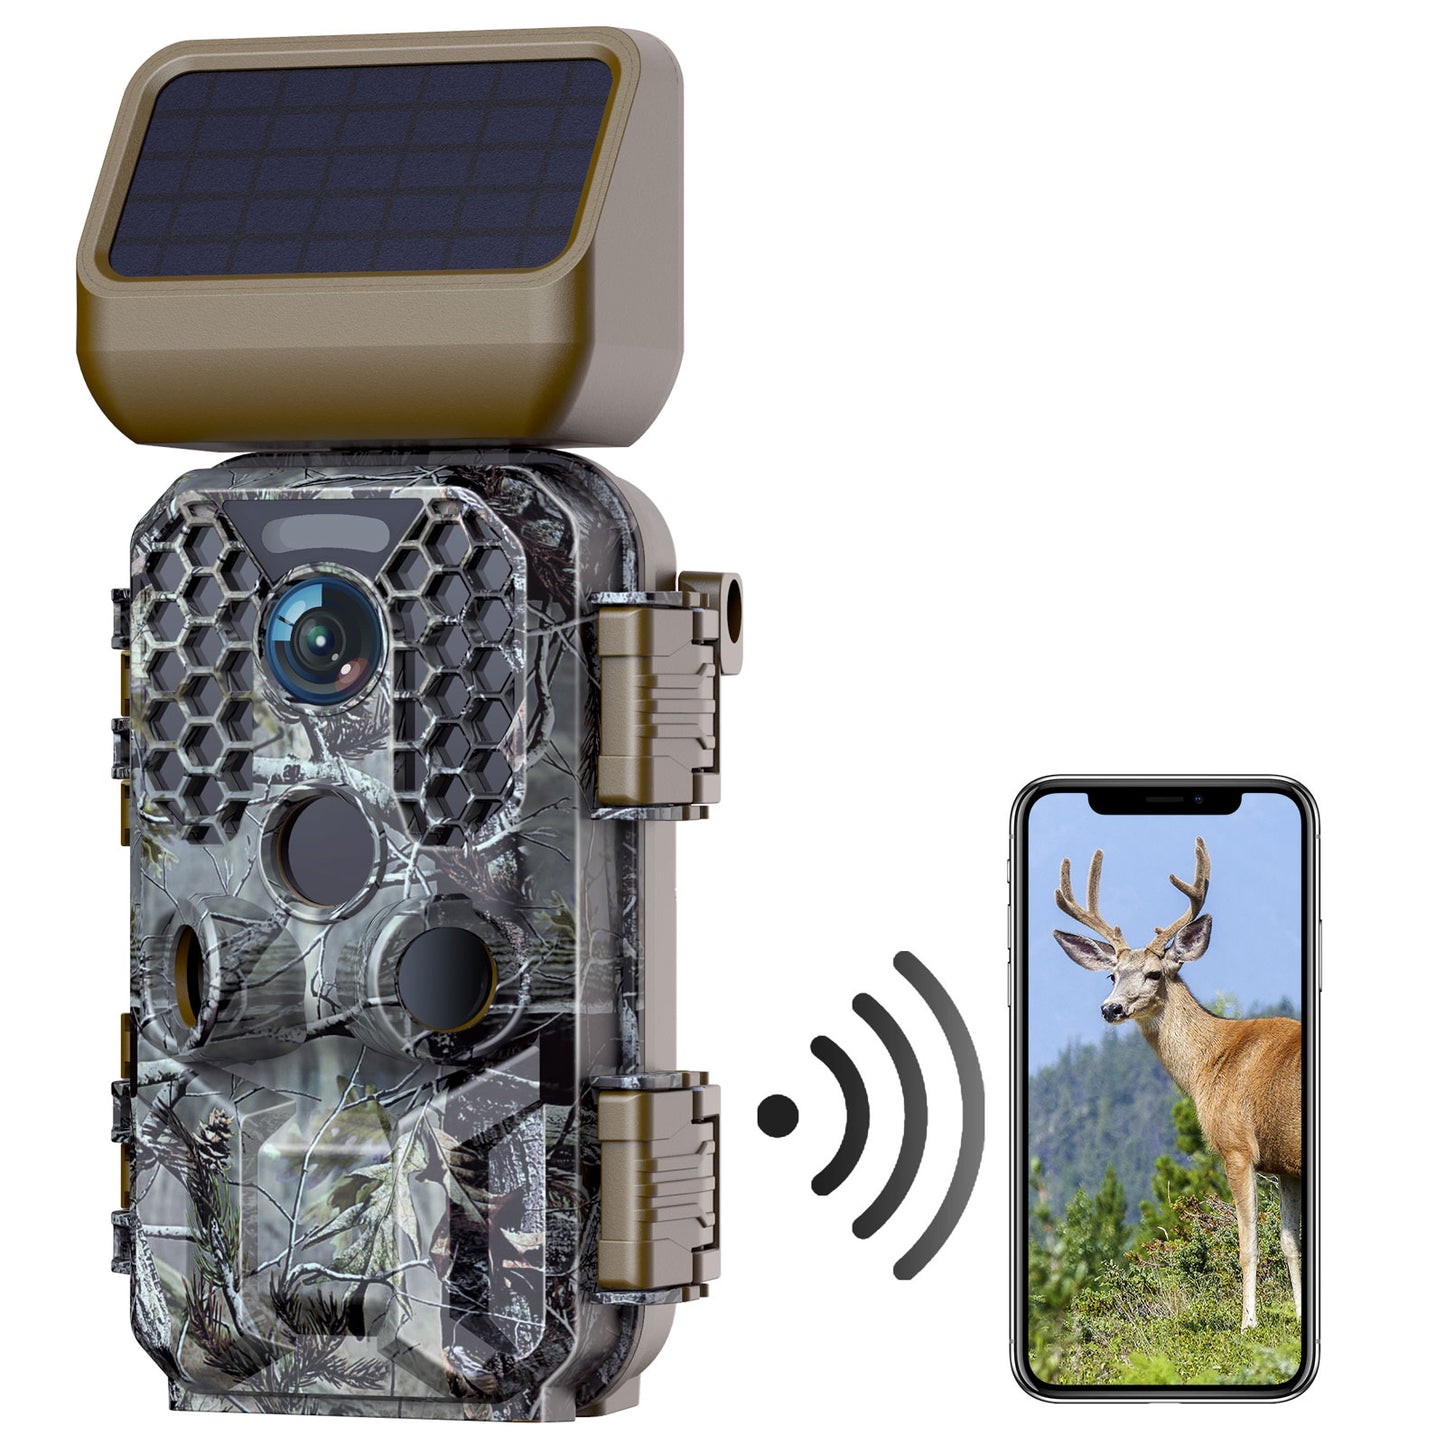 CAMPARK Solar Powered Trail Camera Native 4K 30fps WiFi Bluetooth 48MP Game Camera with Night Vision Waterproof IP66 Motion Activated 120° Wide Angle Hunting Deer Trail Cam for Wildlife Monitoring